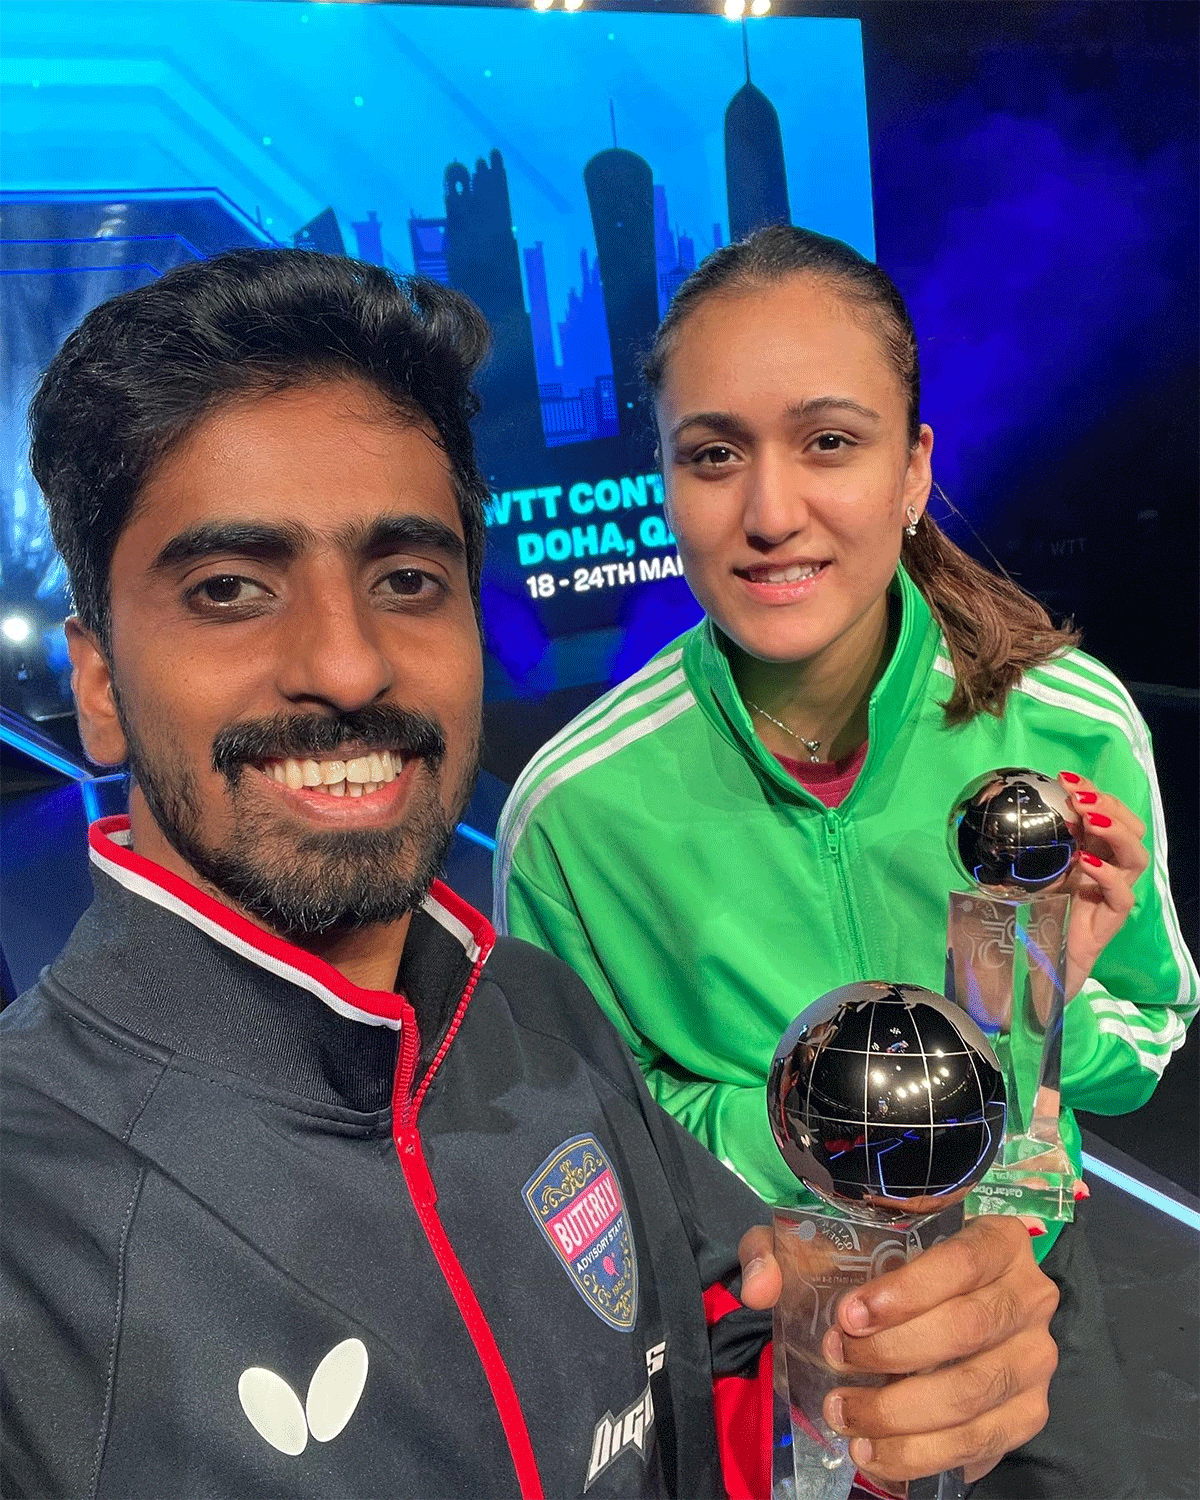 G Sathiyan and Manika Batra all smiles after their silver at the WTT Contender 22 in Doha on Thursday